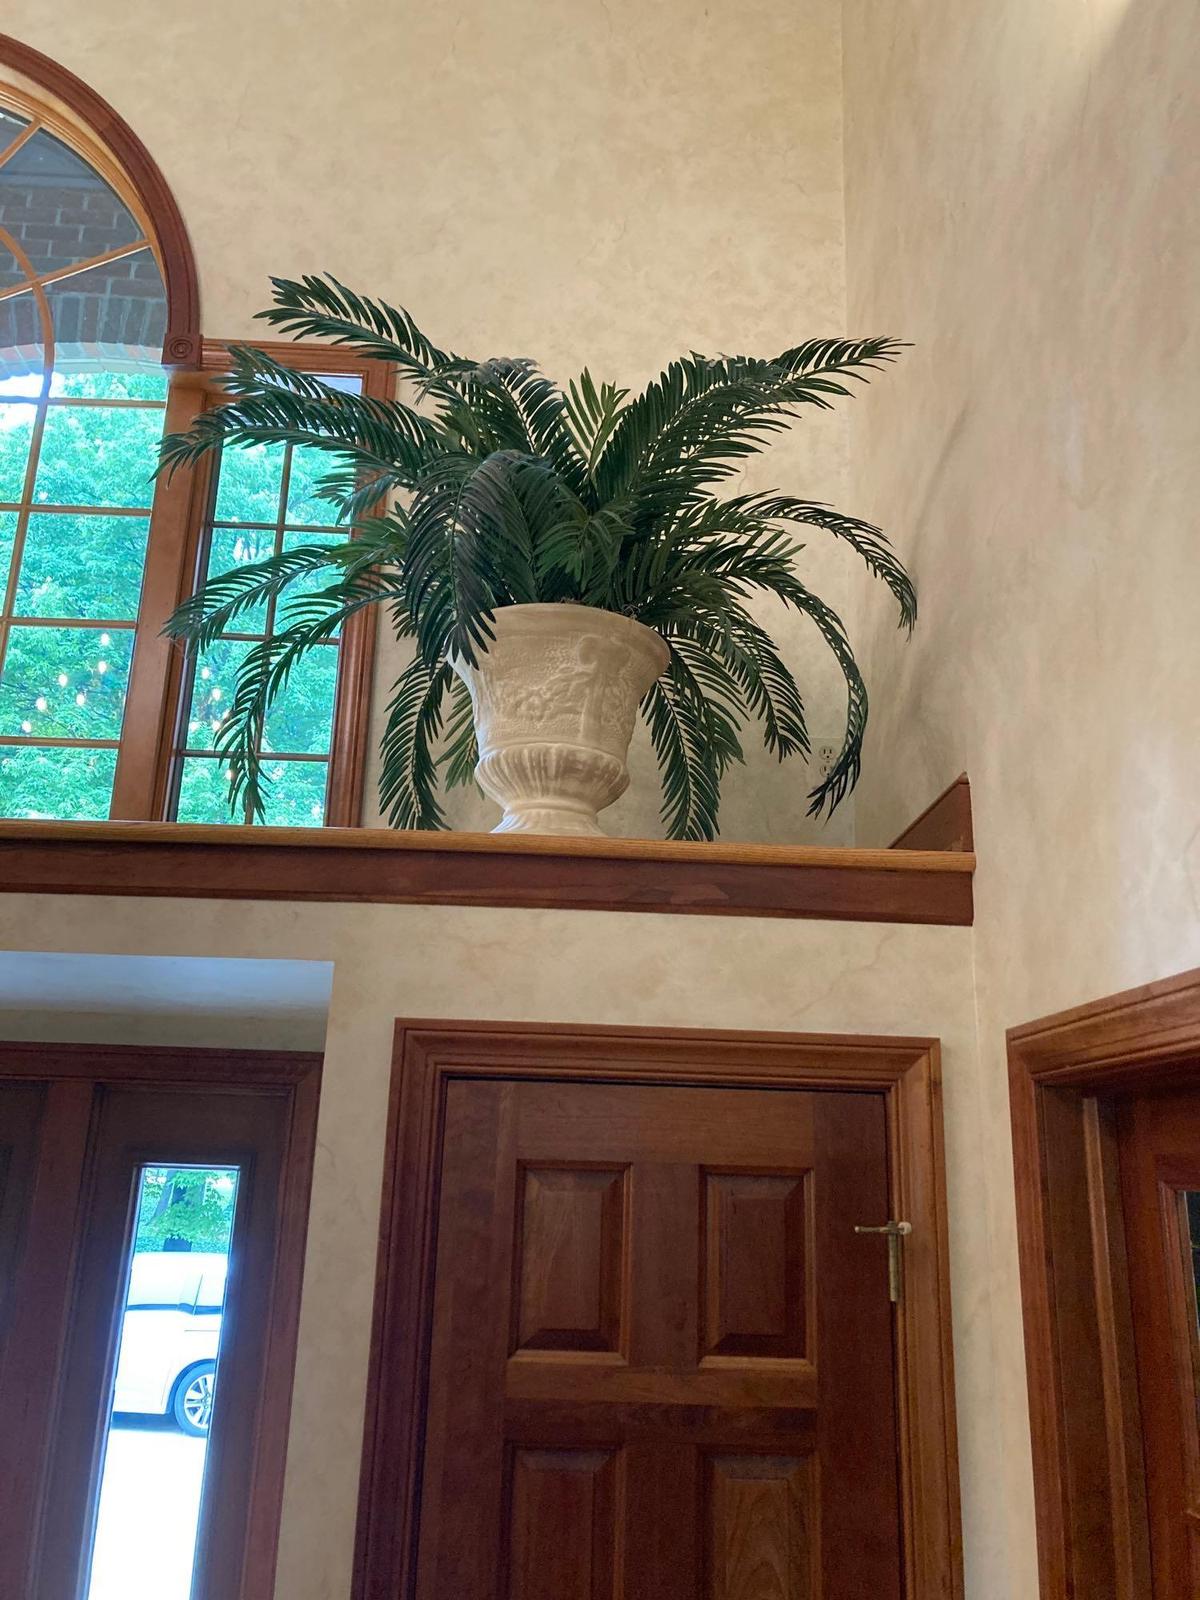 One pair of large urns with ferns